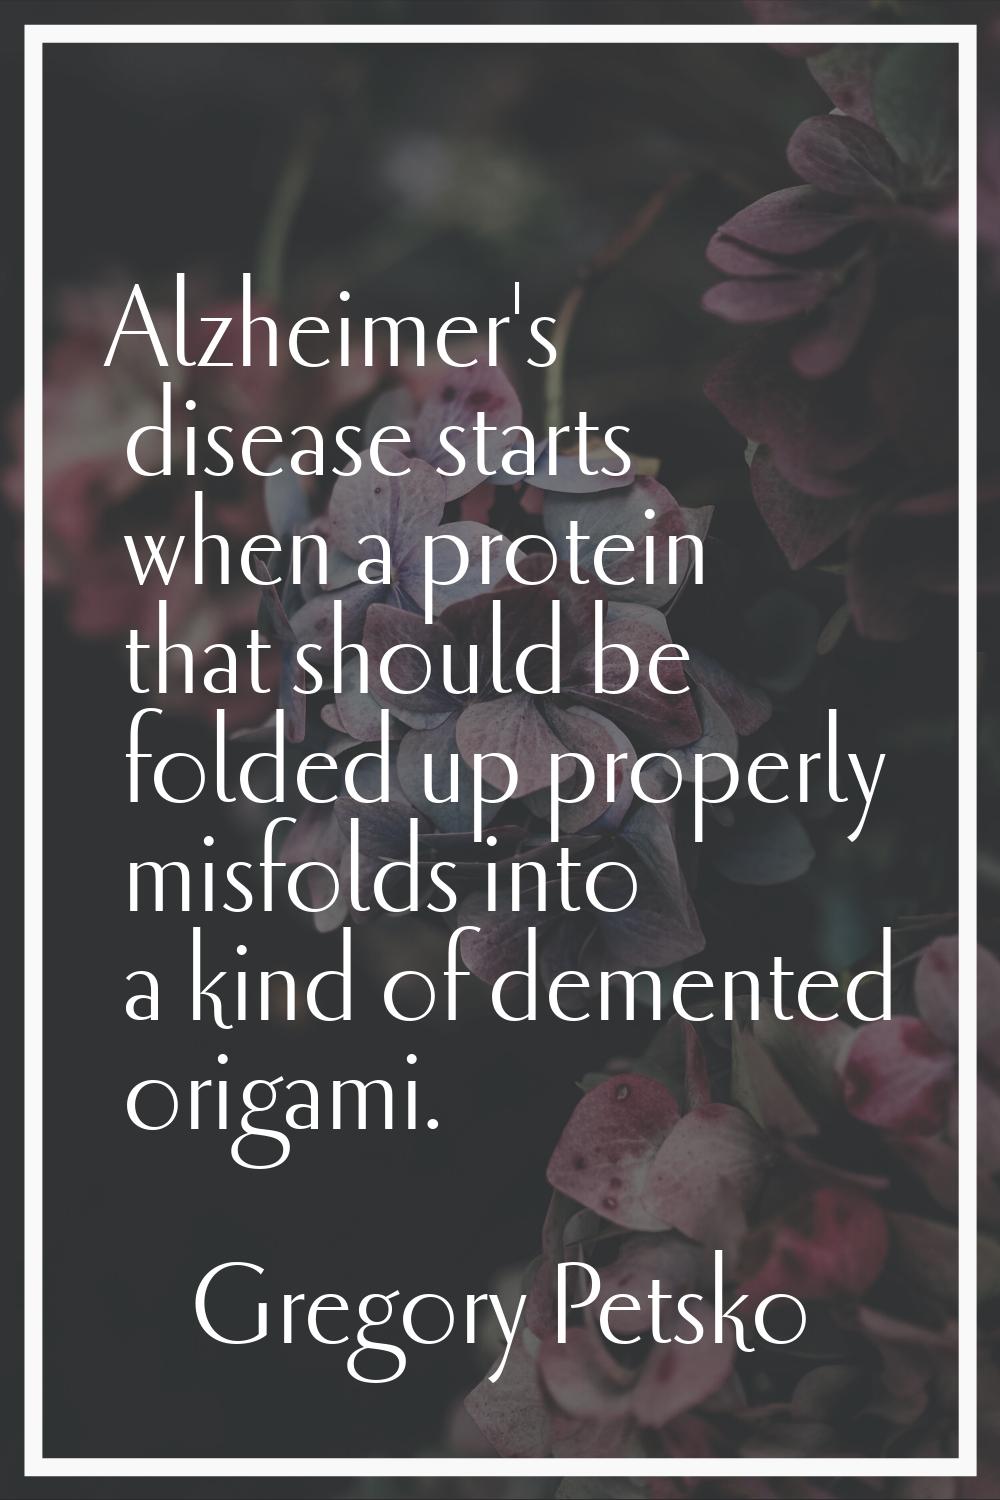 Alzheimer's disease starts when a protein that should be folded up properly misfolds into a kind of